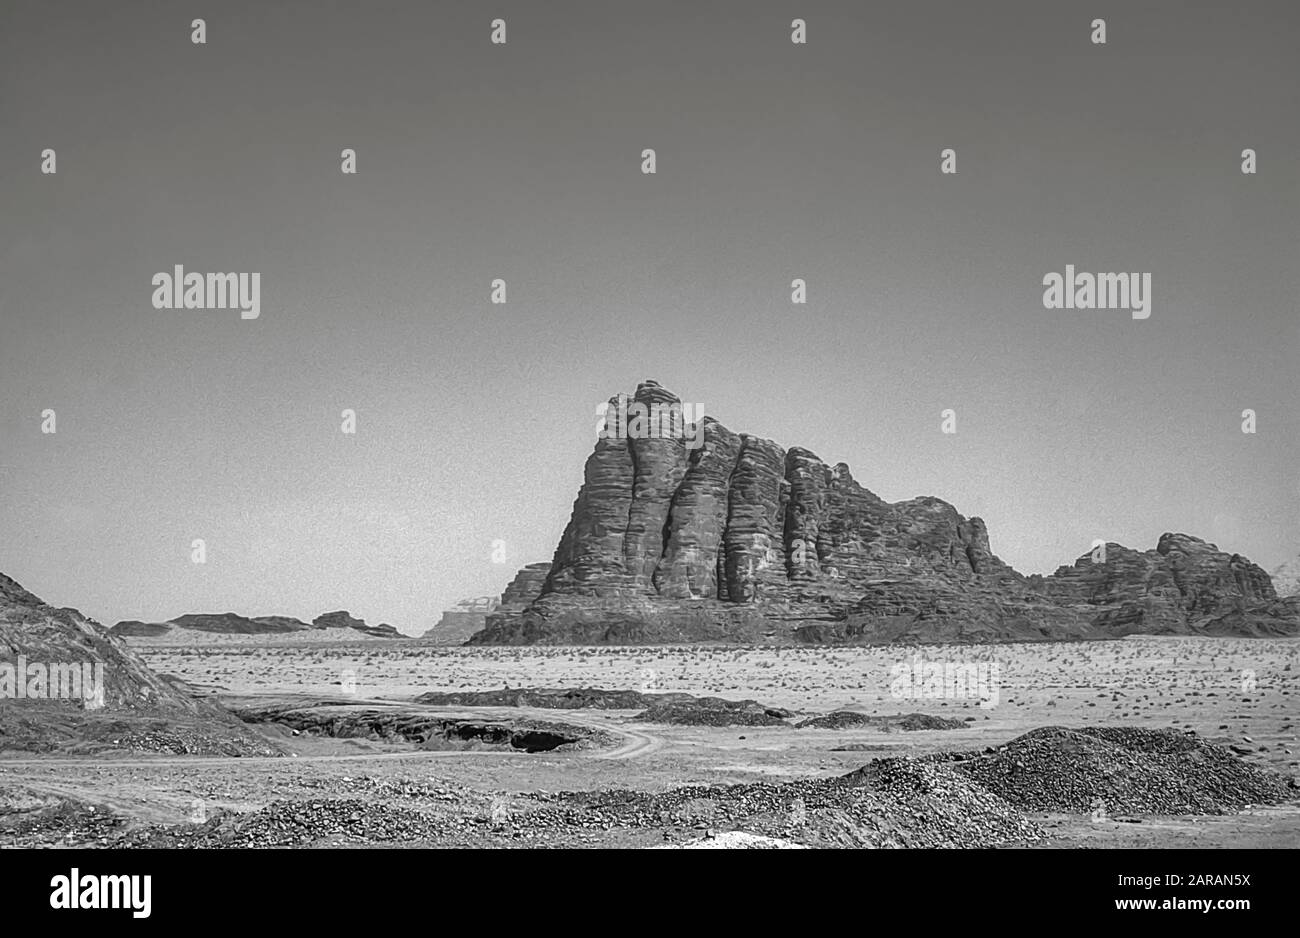 Jordan. Monochrome scenes at the UNESCO World Heritage Site of Wadi Rum near the port of Aqaba in southern Jordan  looking towards the Seven Pillars of Wisdom mountain associated with Lawrence of Arabia. Stock Photo